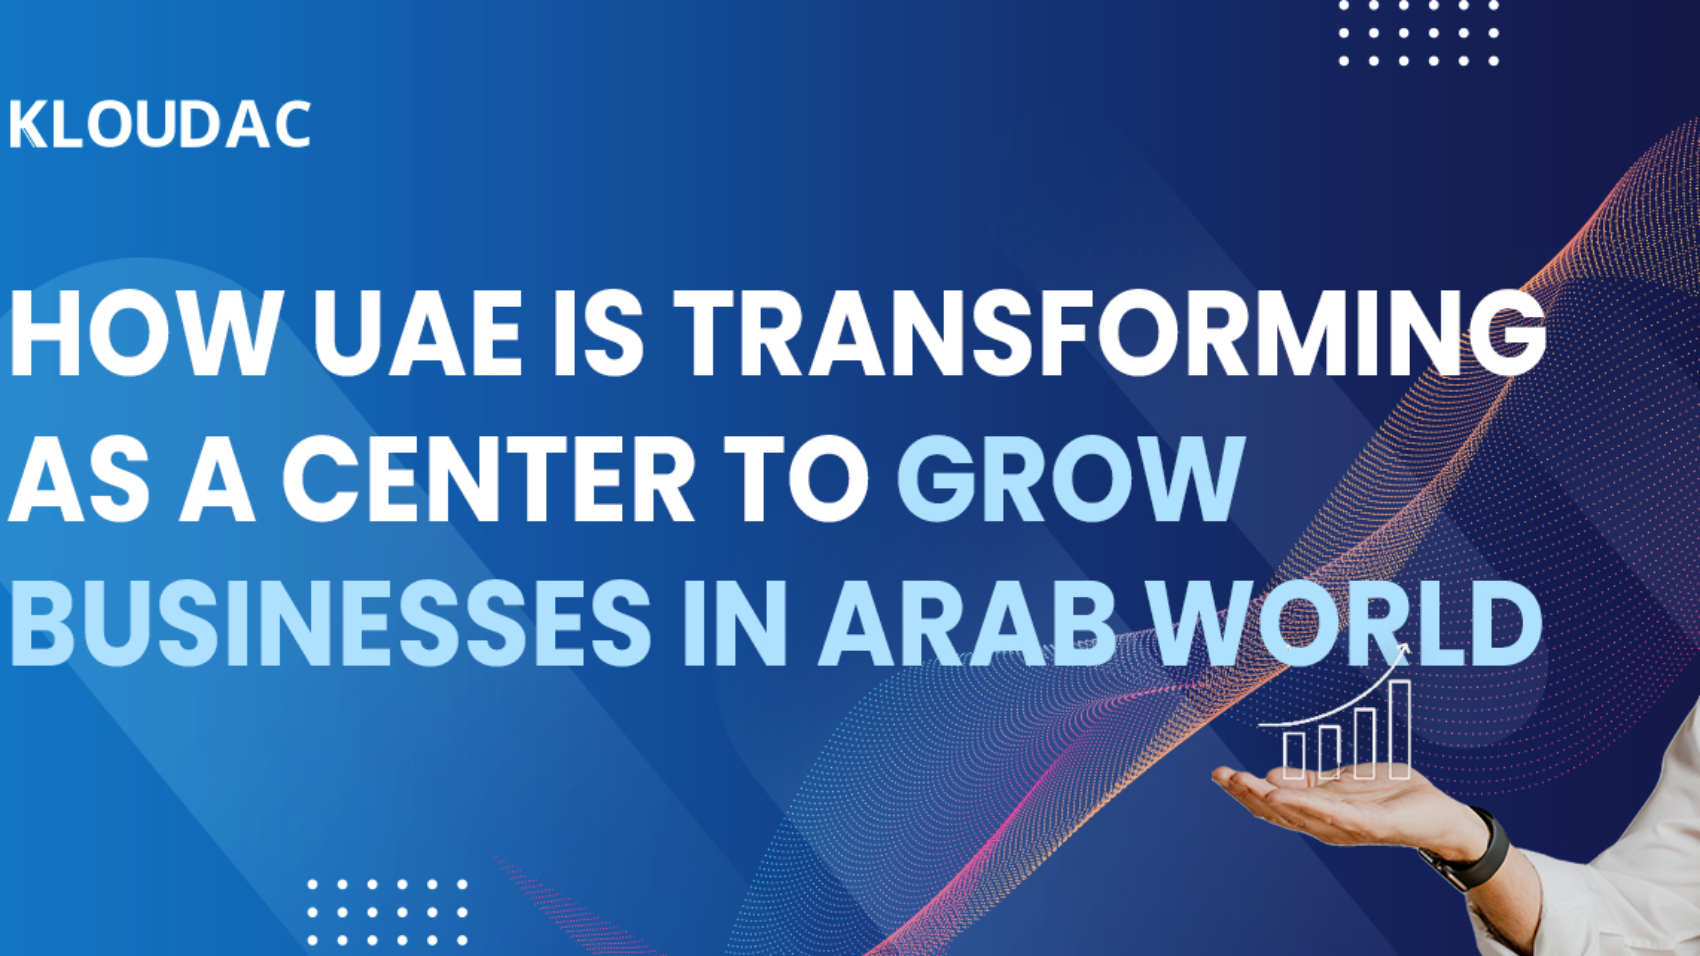 How UAE is transforming as a center to grow businesses in Arab world